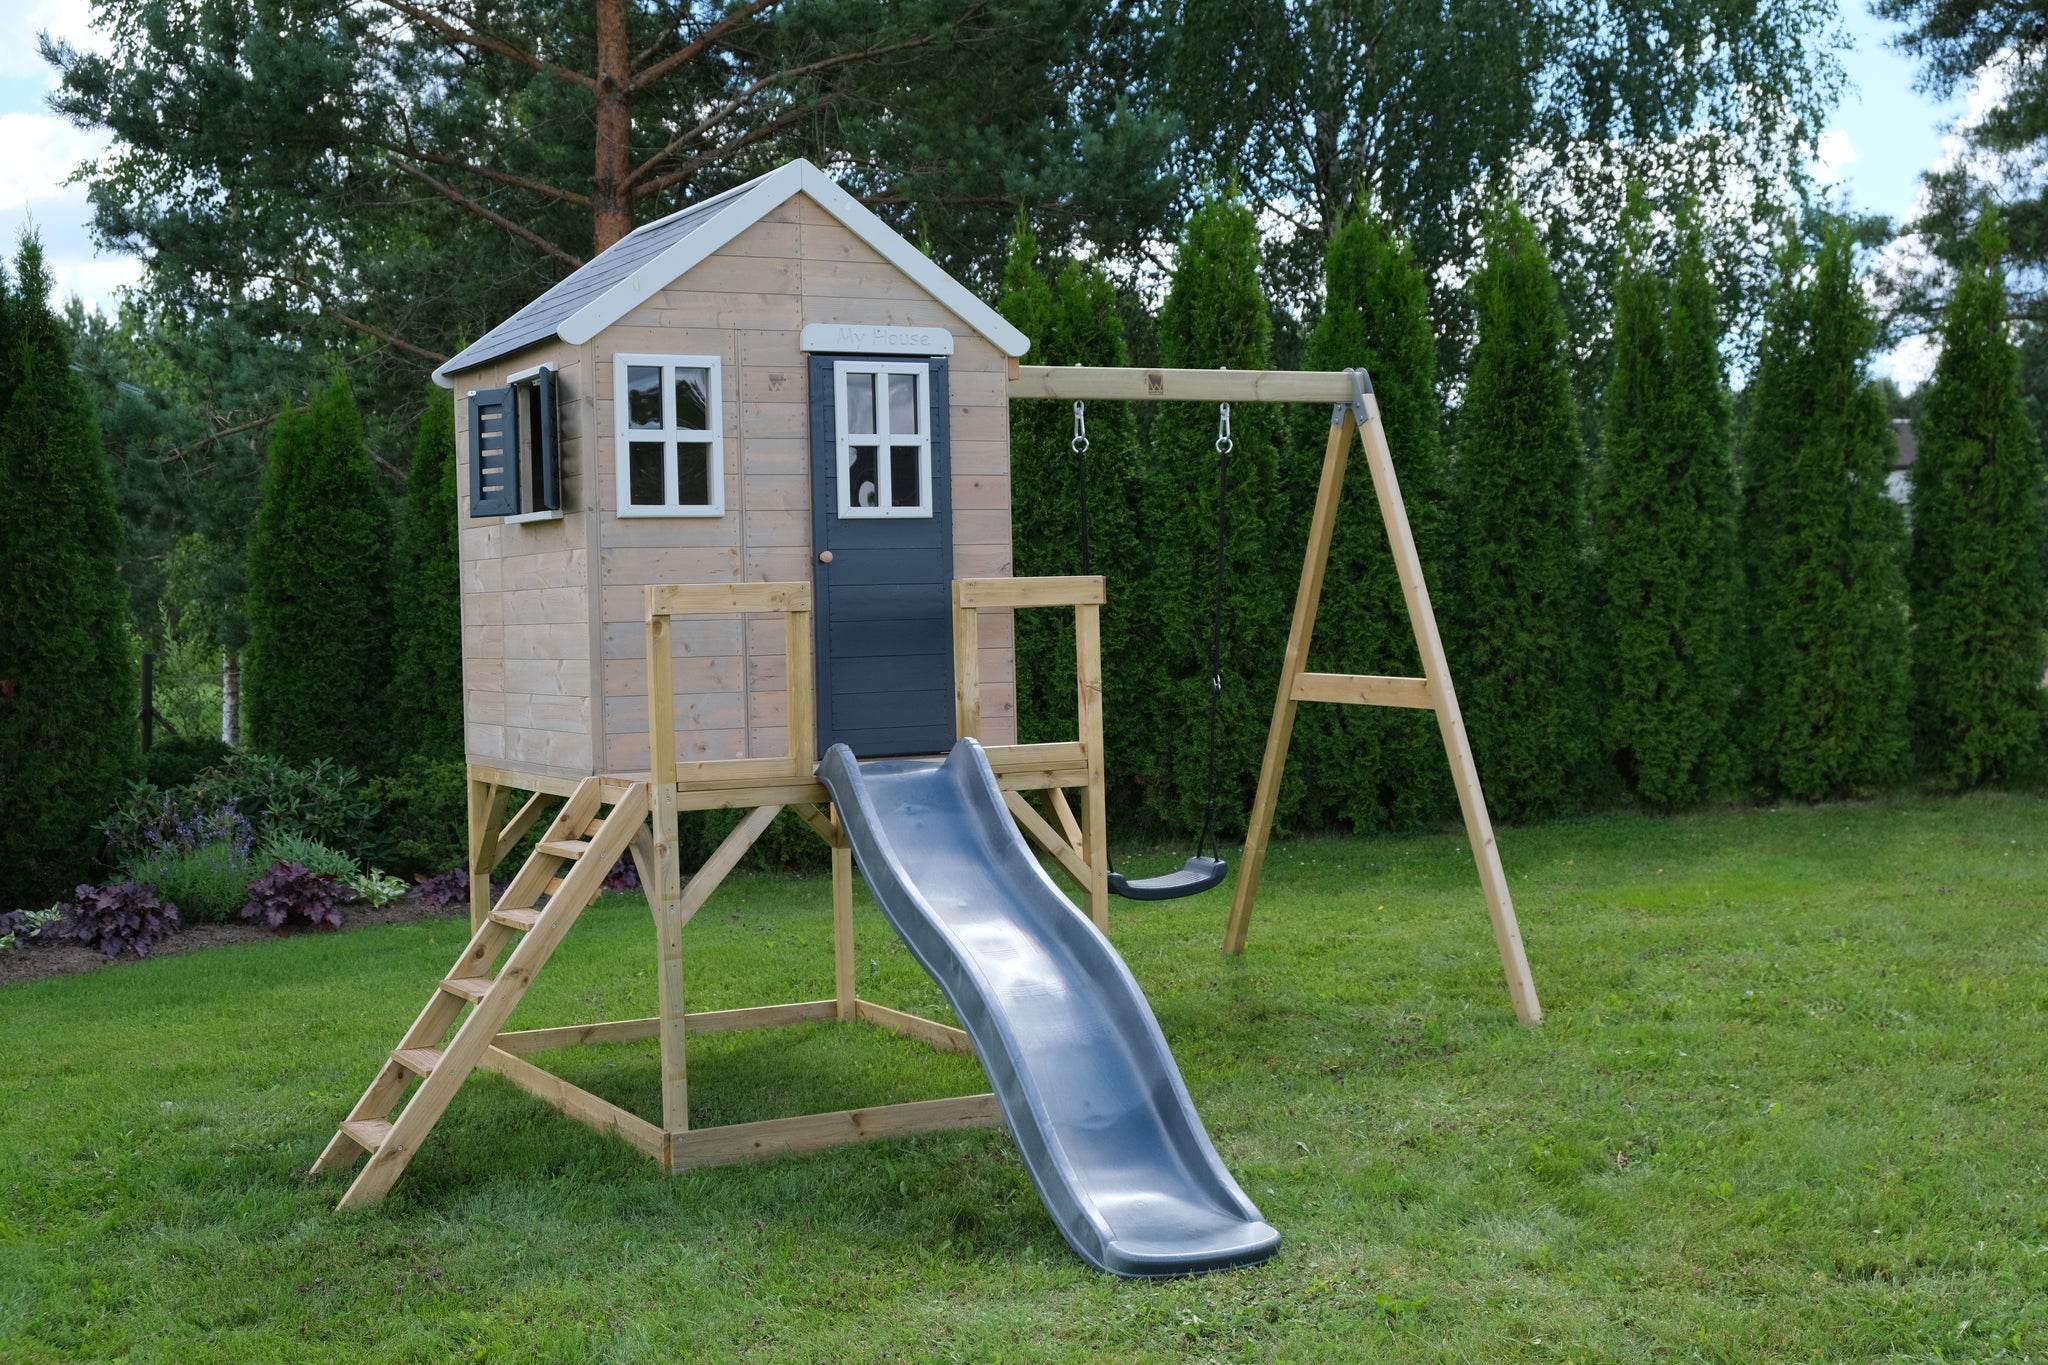 M24-K My Lodge with Platform, Slide and Single Swing + Kitchen Attachment